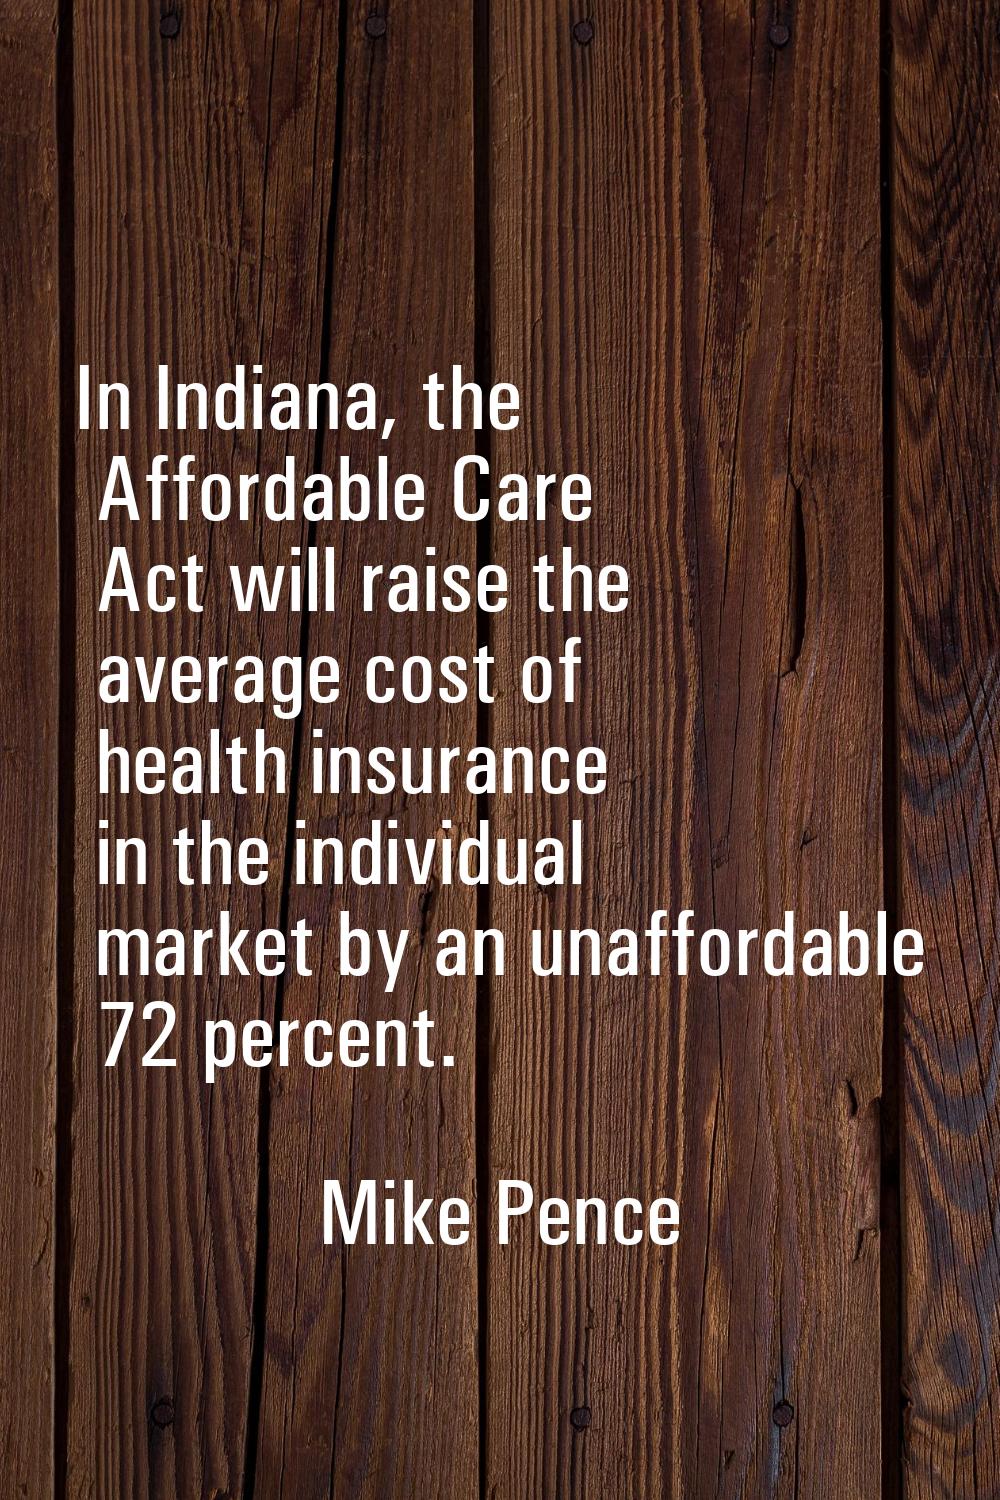 In Indiana, the Affordable Care Act will raise the average cost of health insurance in the individu